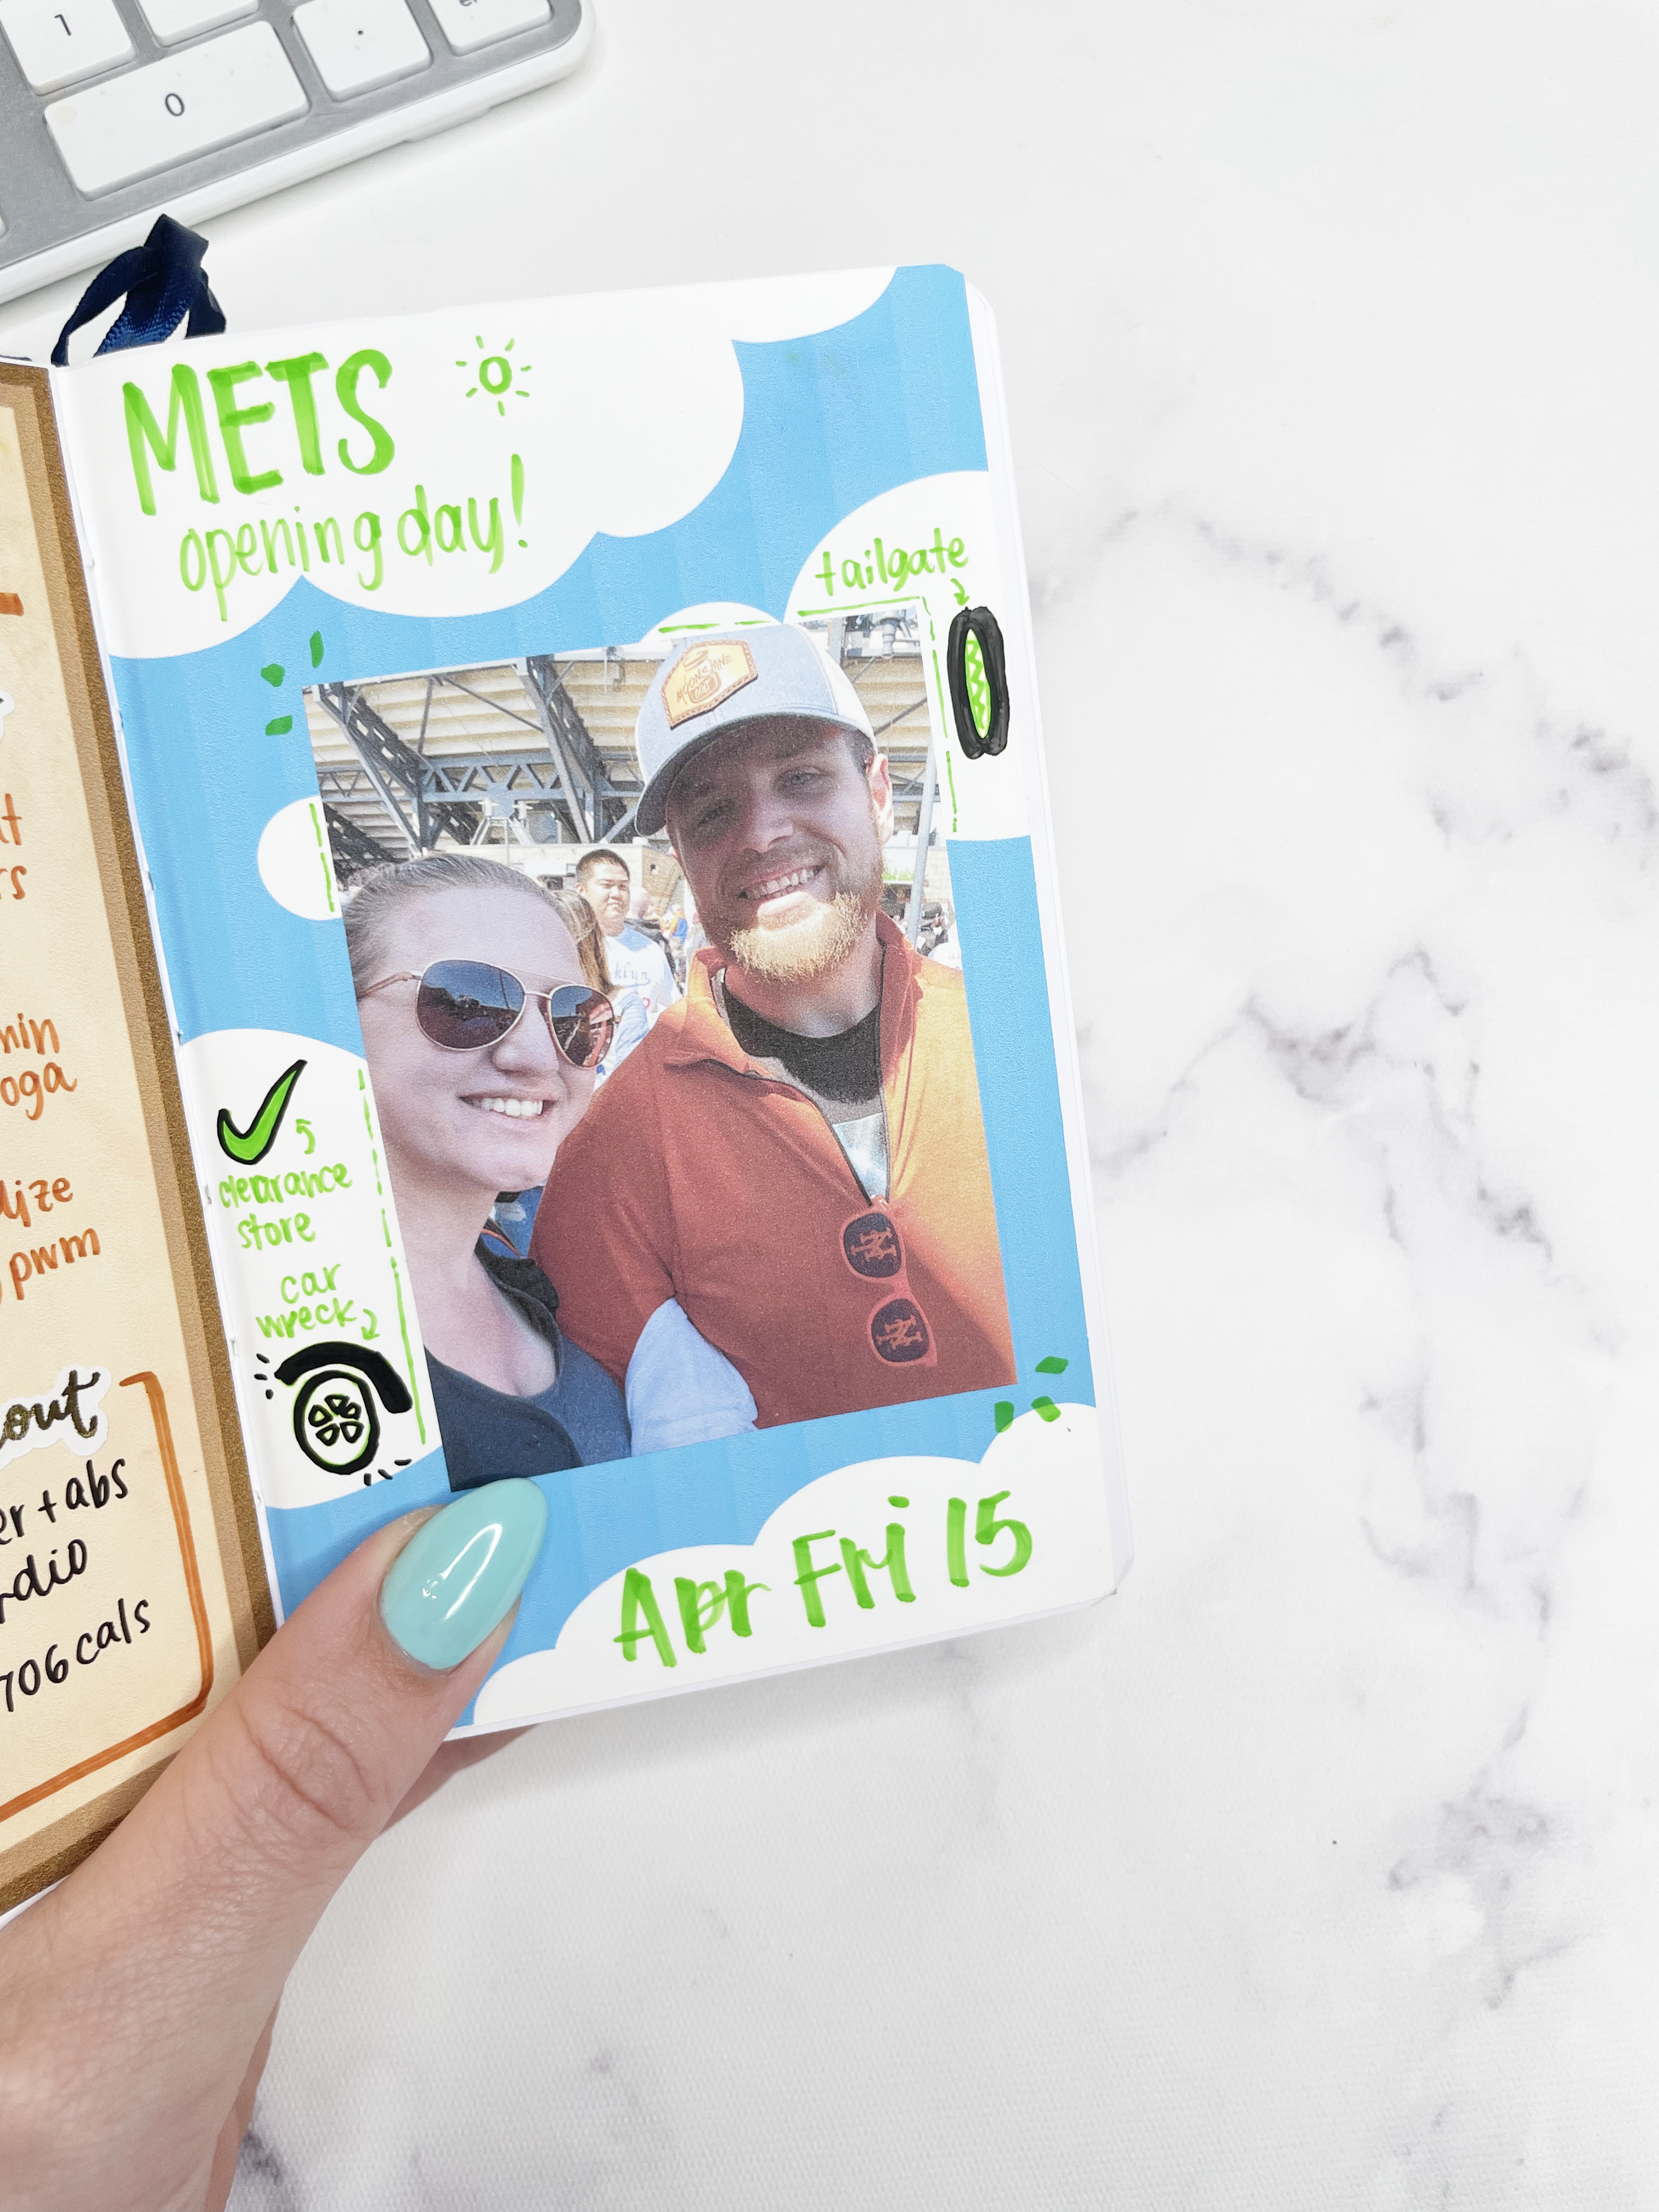 memory keeping with photo and doodles in an a6 planner